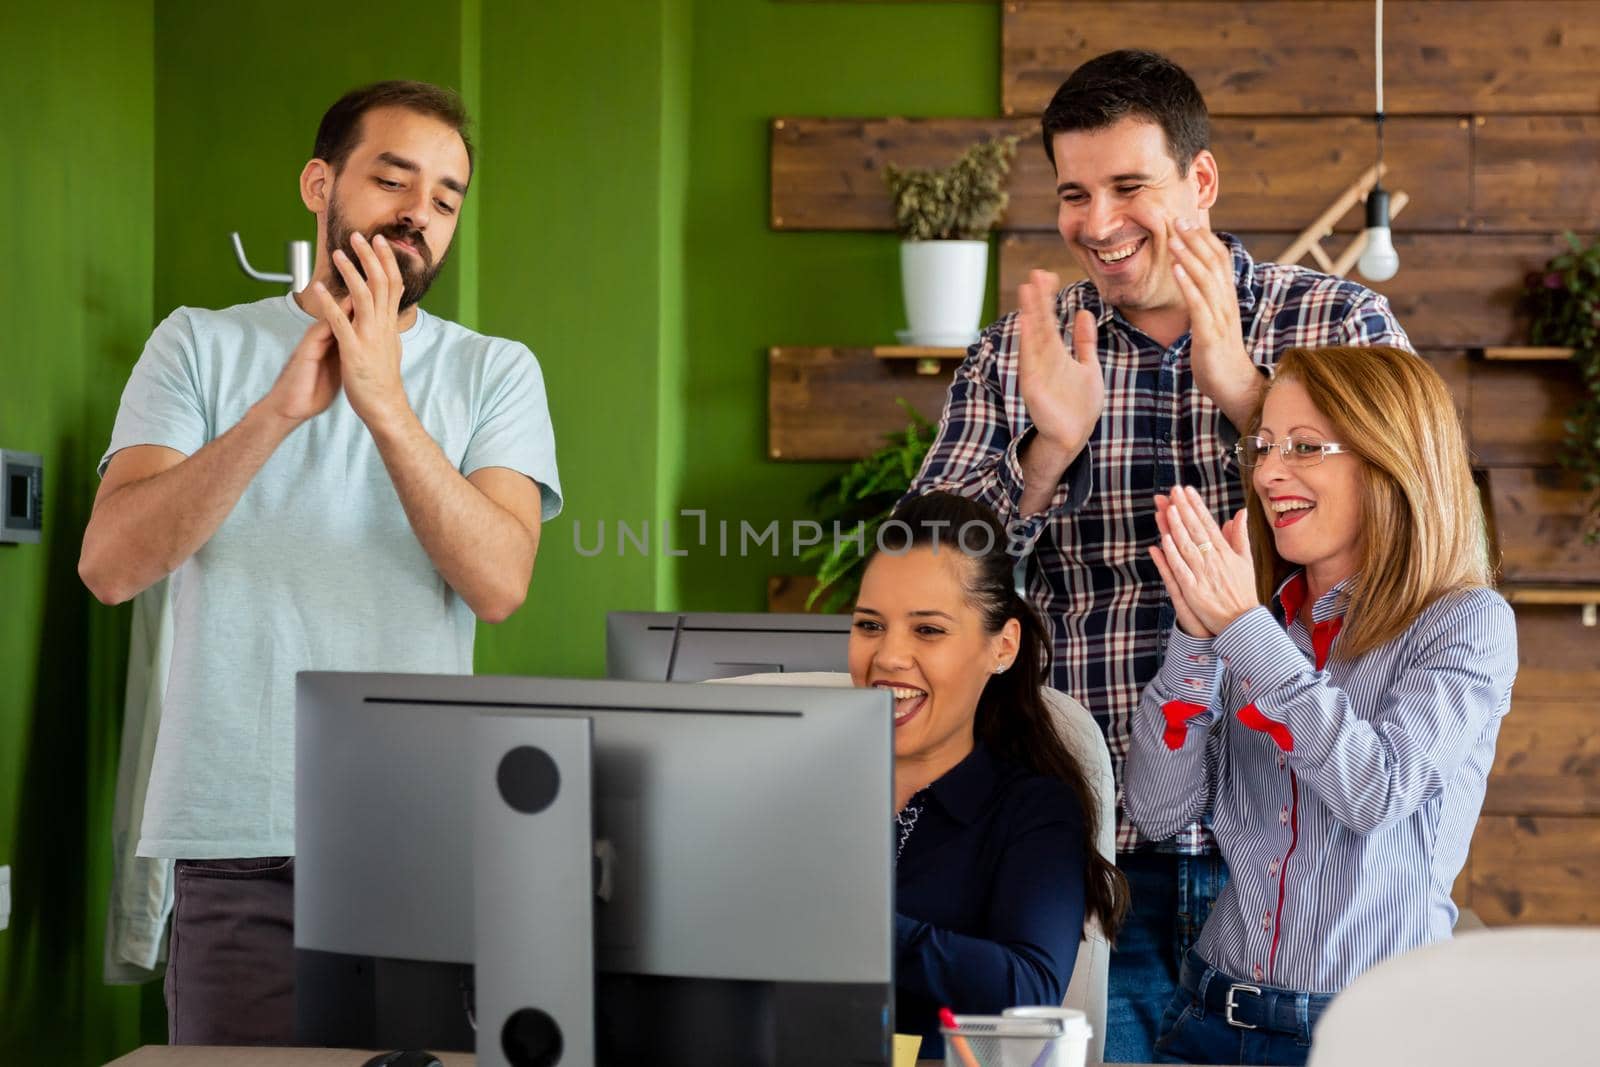 Young creative team in start-up company clapping in front of PC screen by DCStudio